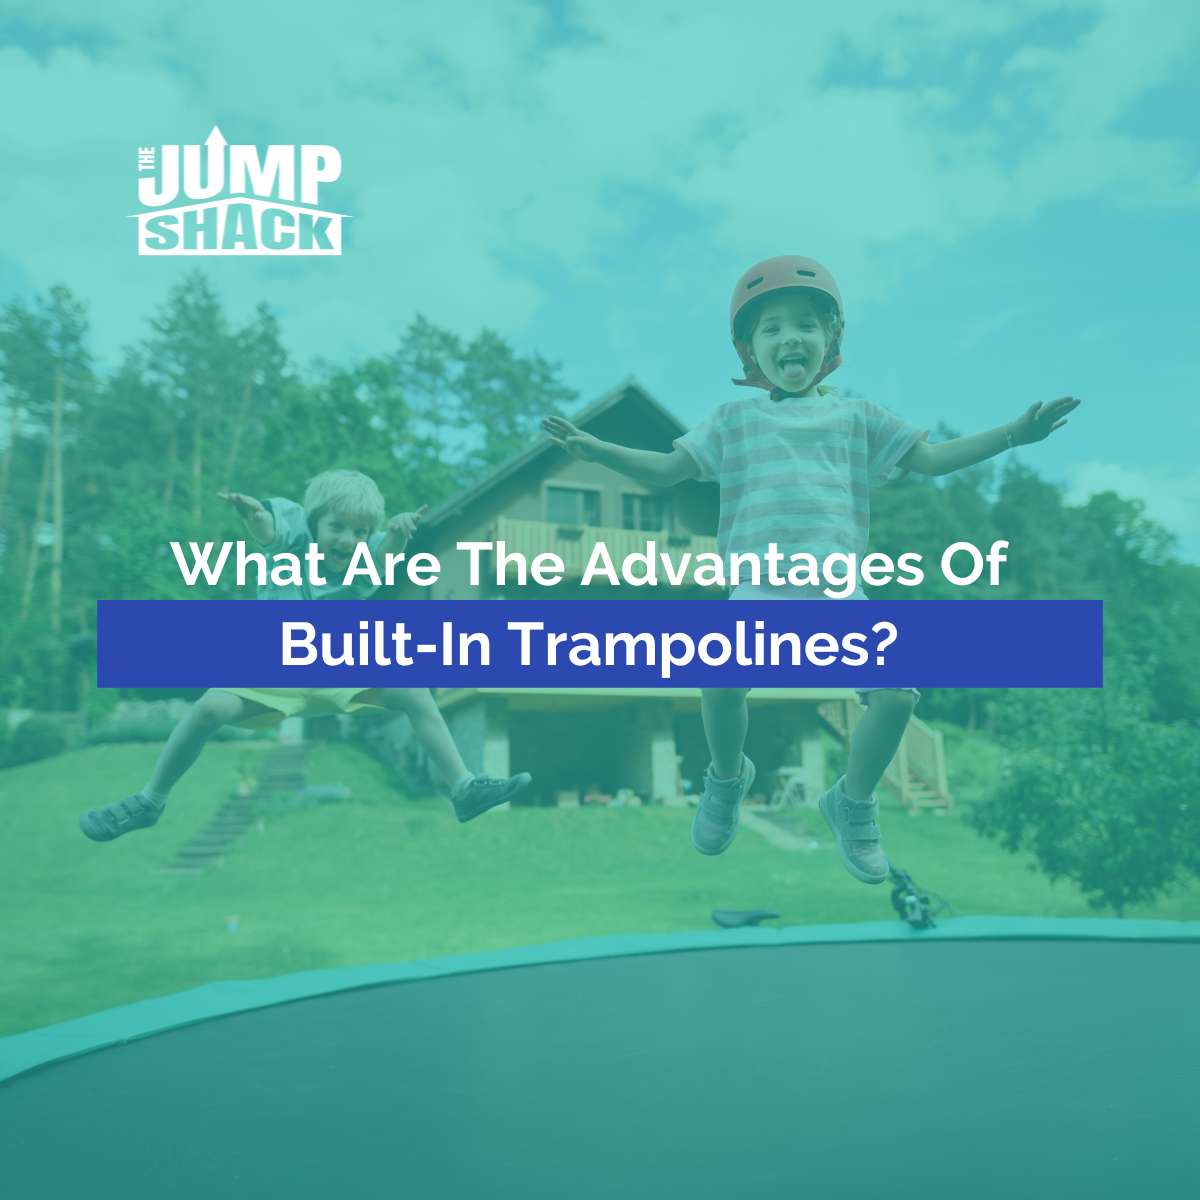 What Are The Advantages Of Built-In Trampolines